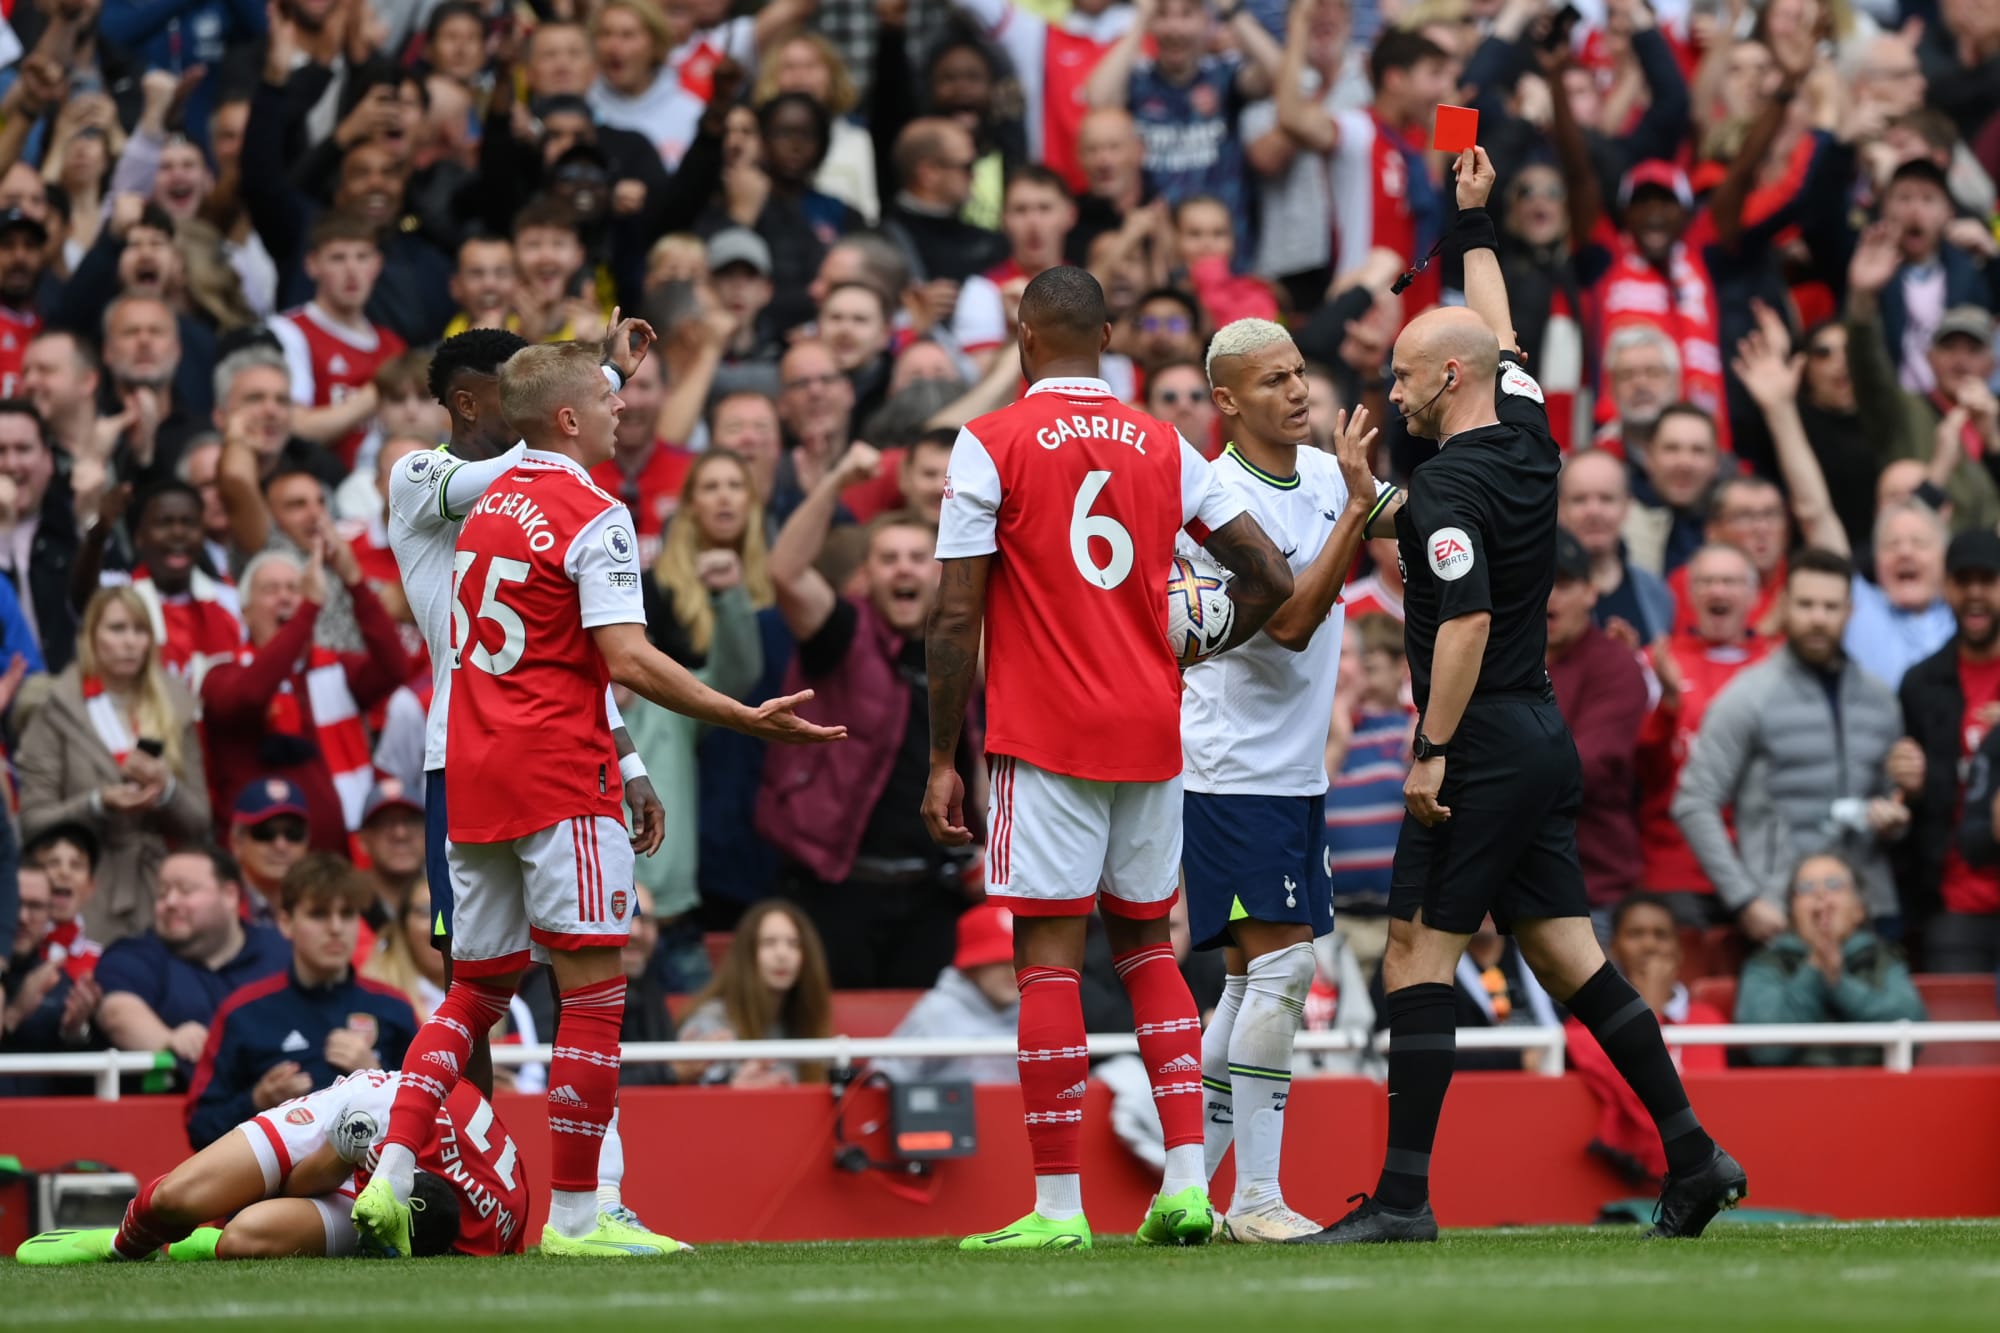 Taylor takes derby out of Tottenham hands, as Arsenal stay top